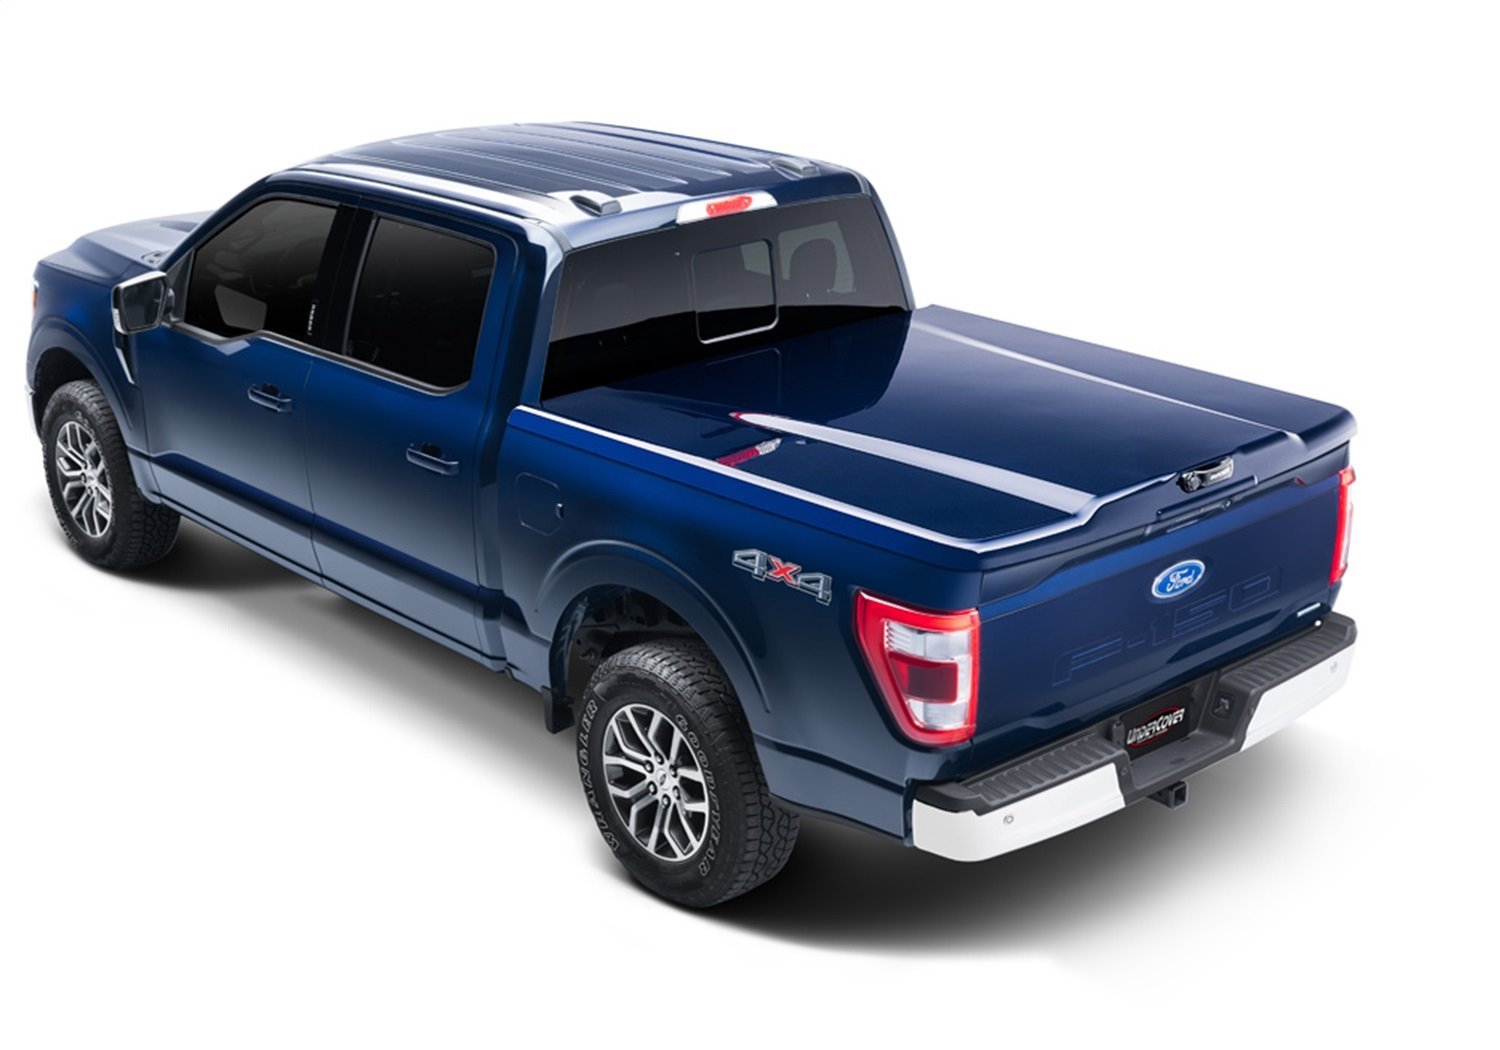 UC2218L-YZ Elite LX Hard Non-Folding Cover, Fits Select Ford F-150 6'7" Bed Crew, YZ Oxford White